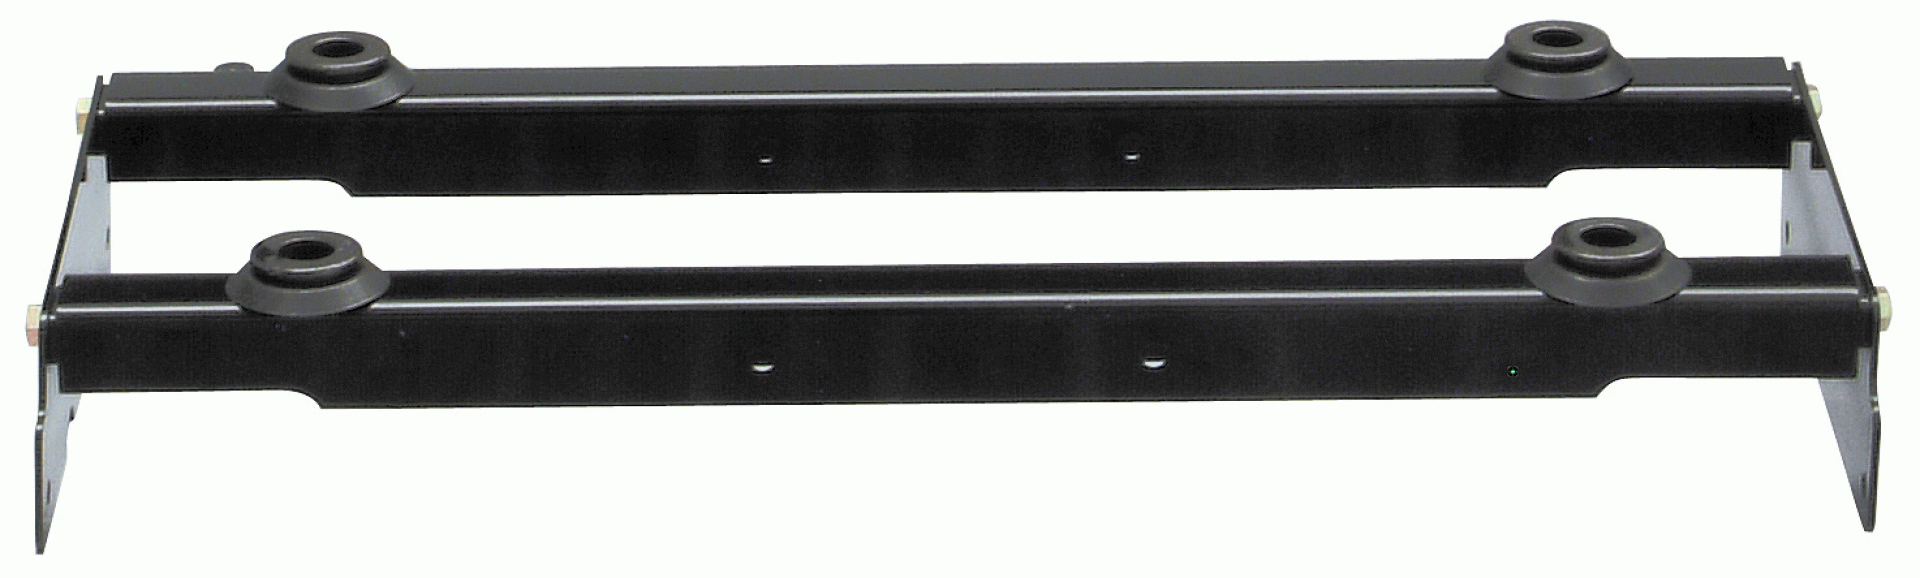 REESE | 30069 | RAIL KIT FOR FIFTH WHEEL ELITE SERIES FITS DODGE 1500/2500/3500 WITH 6 FEET AND 8 FEET BEDS 3500 WITH 8' BED